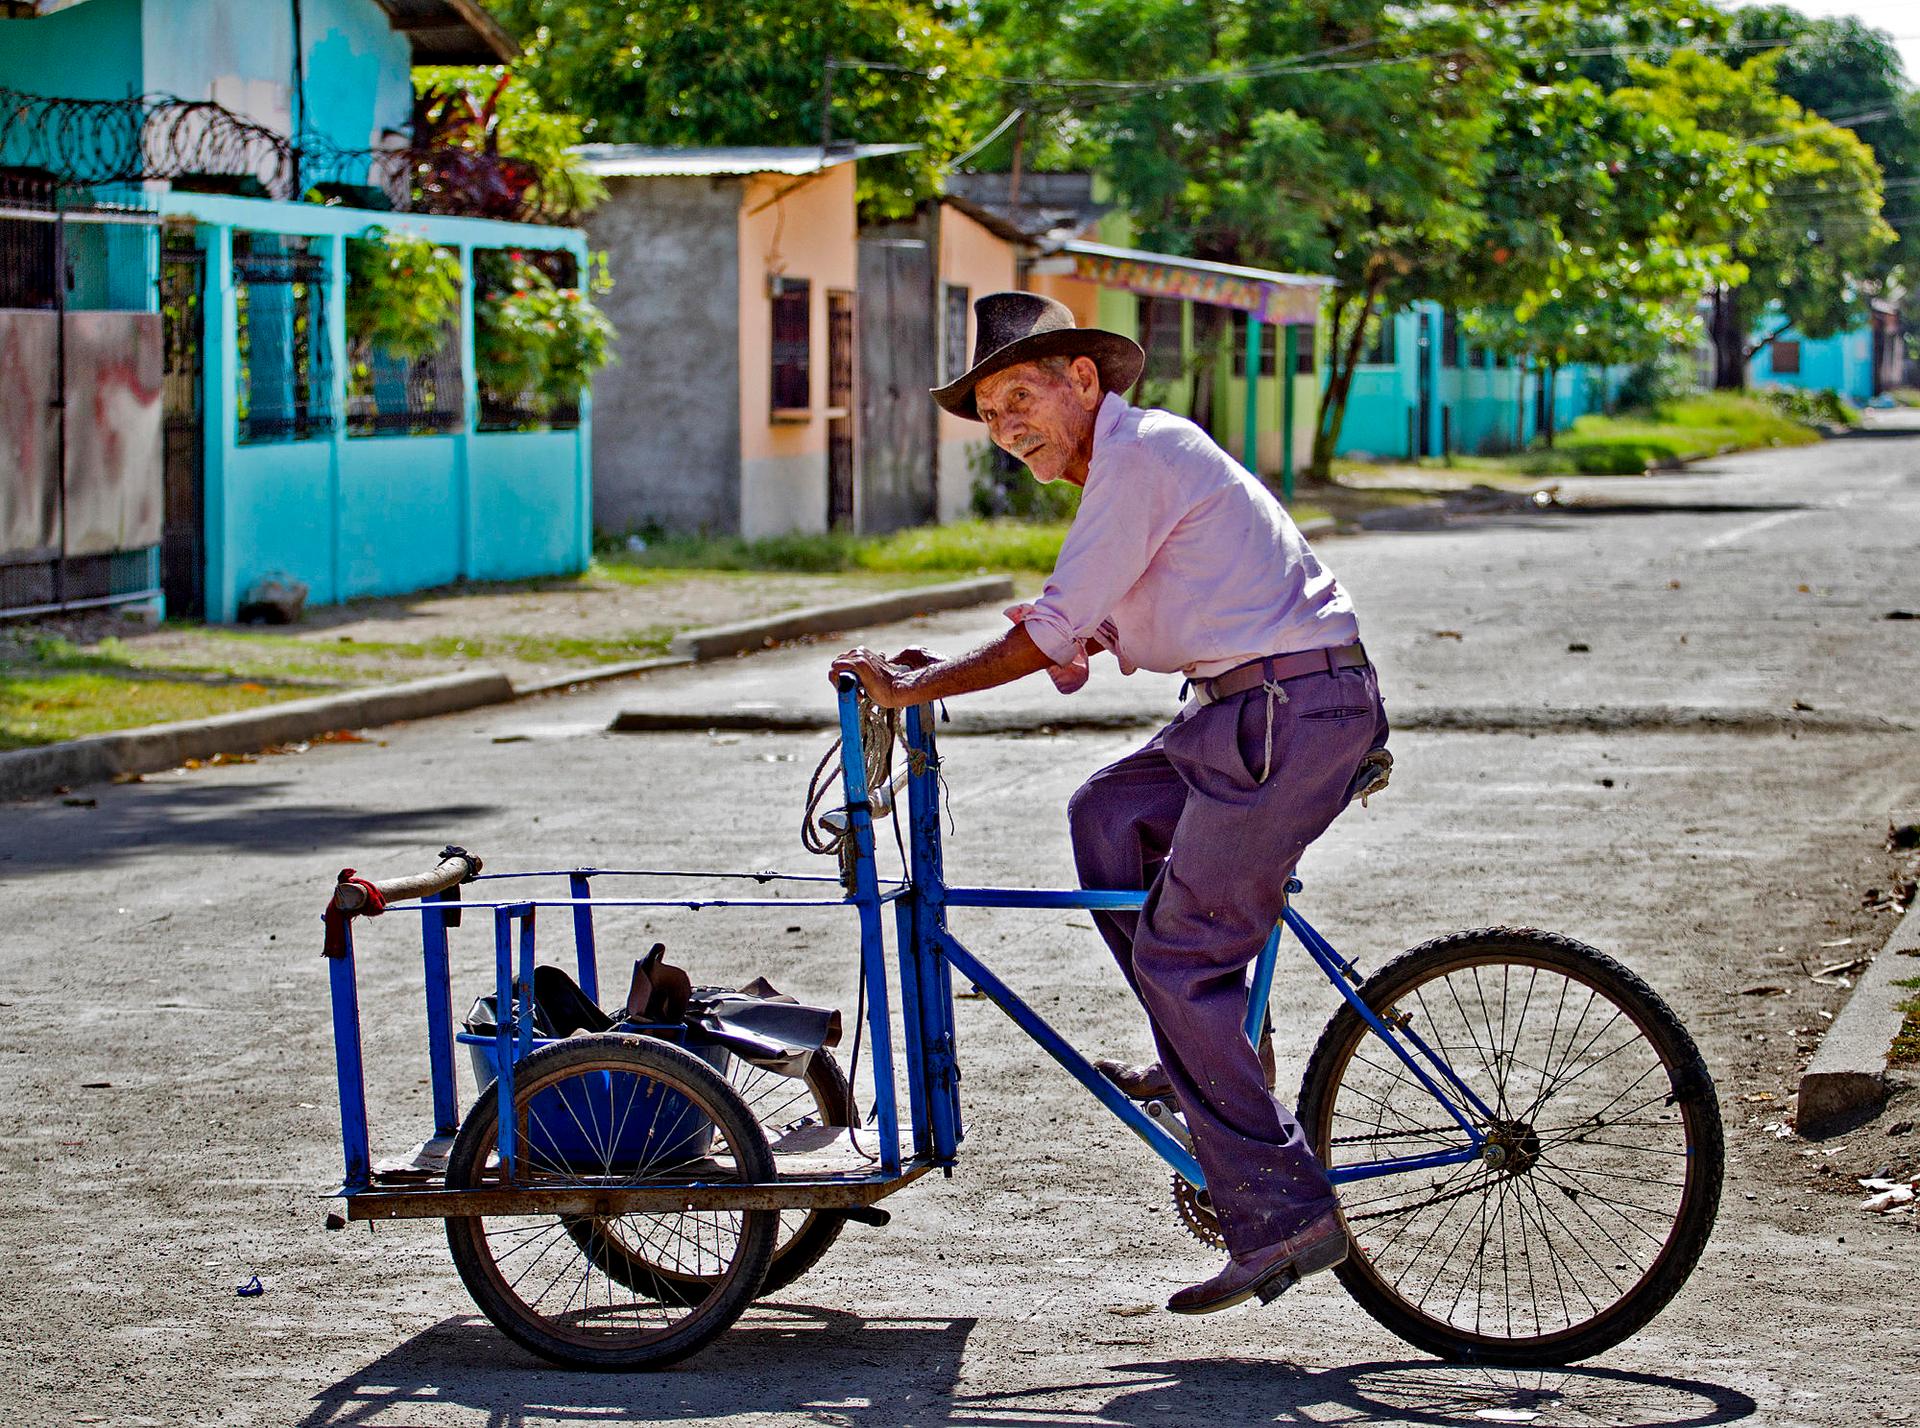 An elderly man rides his bike past colorful homes that were painted by the Honduran police in this once very dangerous Chamelecón neighborhood in San Pedro Sula, Honduras.